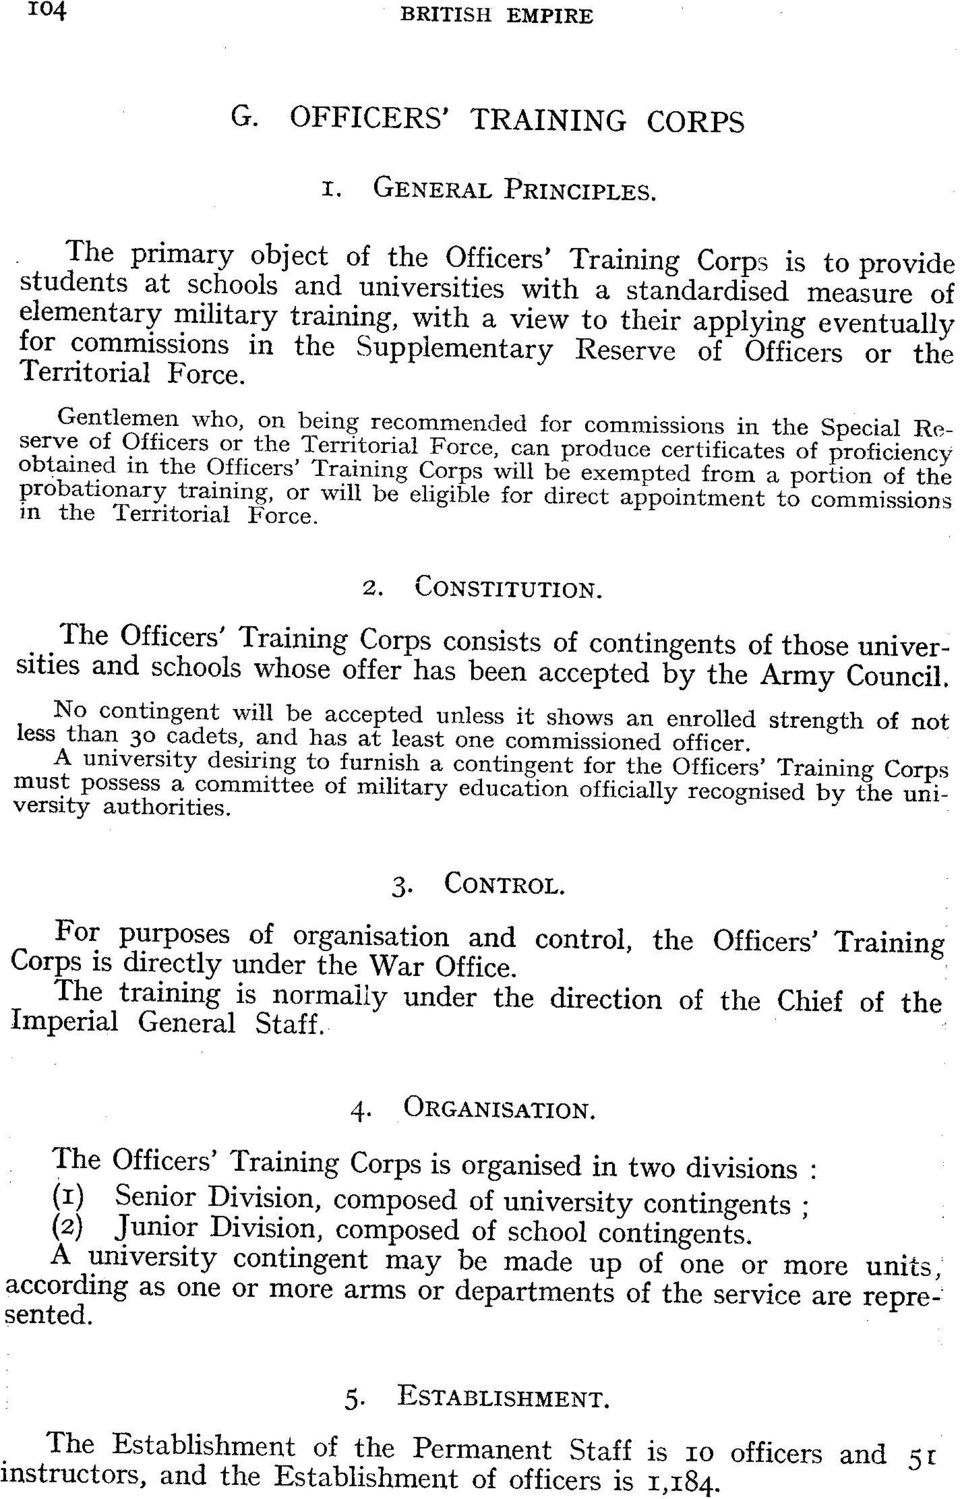 eventually for commissions in the Supplementary Reserve of Officers or the Territorial Force.